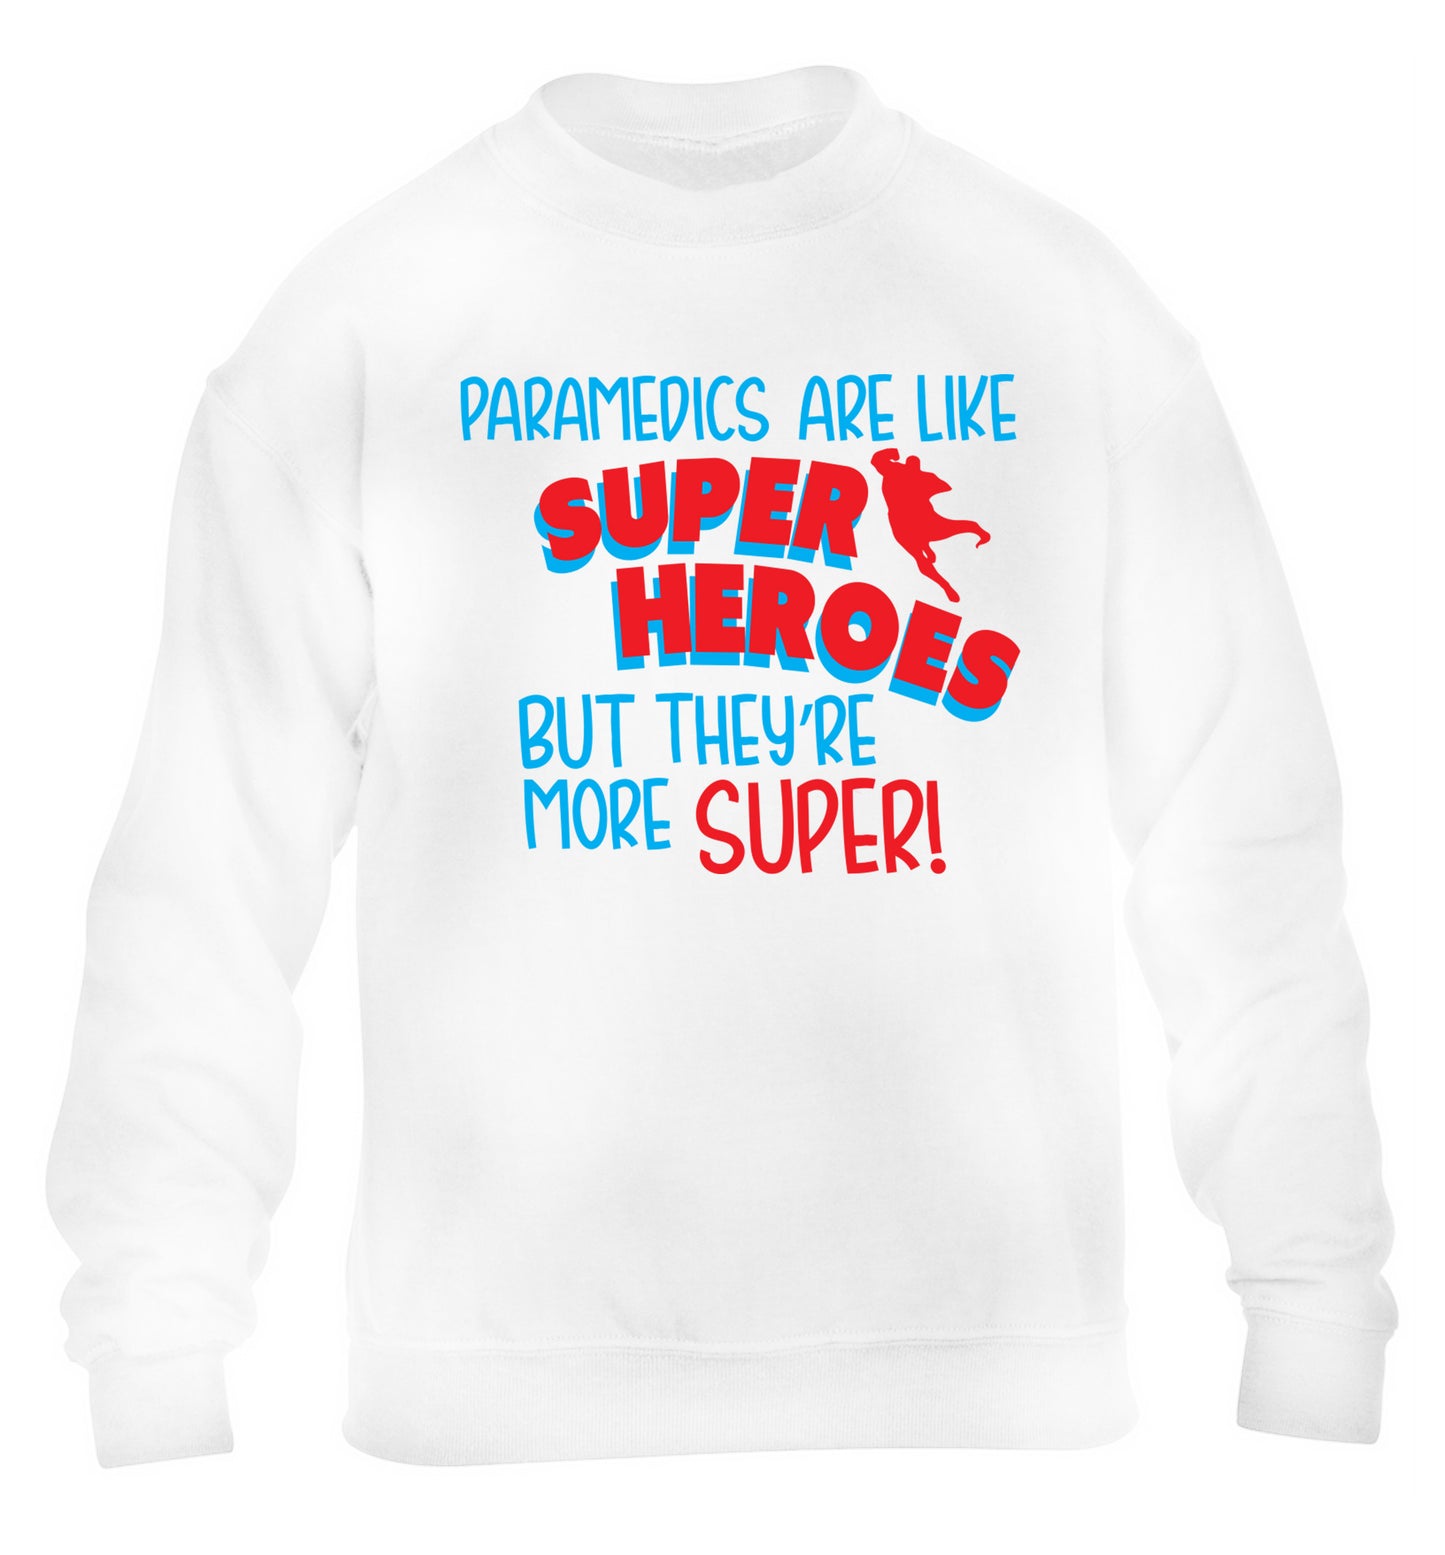 Paramedics are like superheros but they're more super children's white sweater 12-13 Years